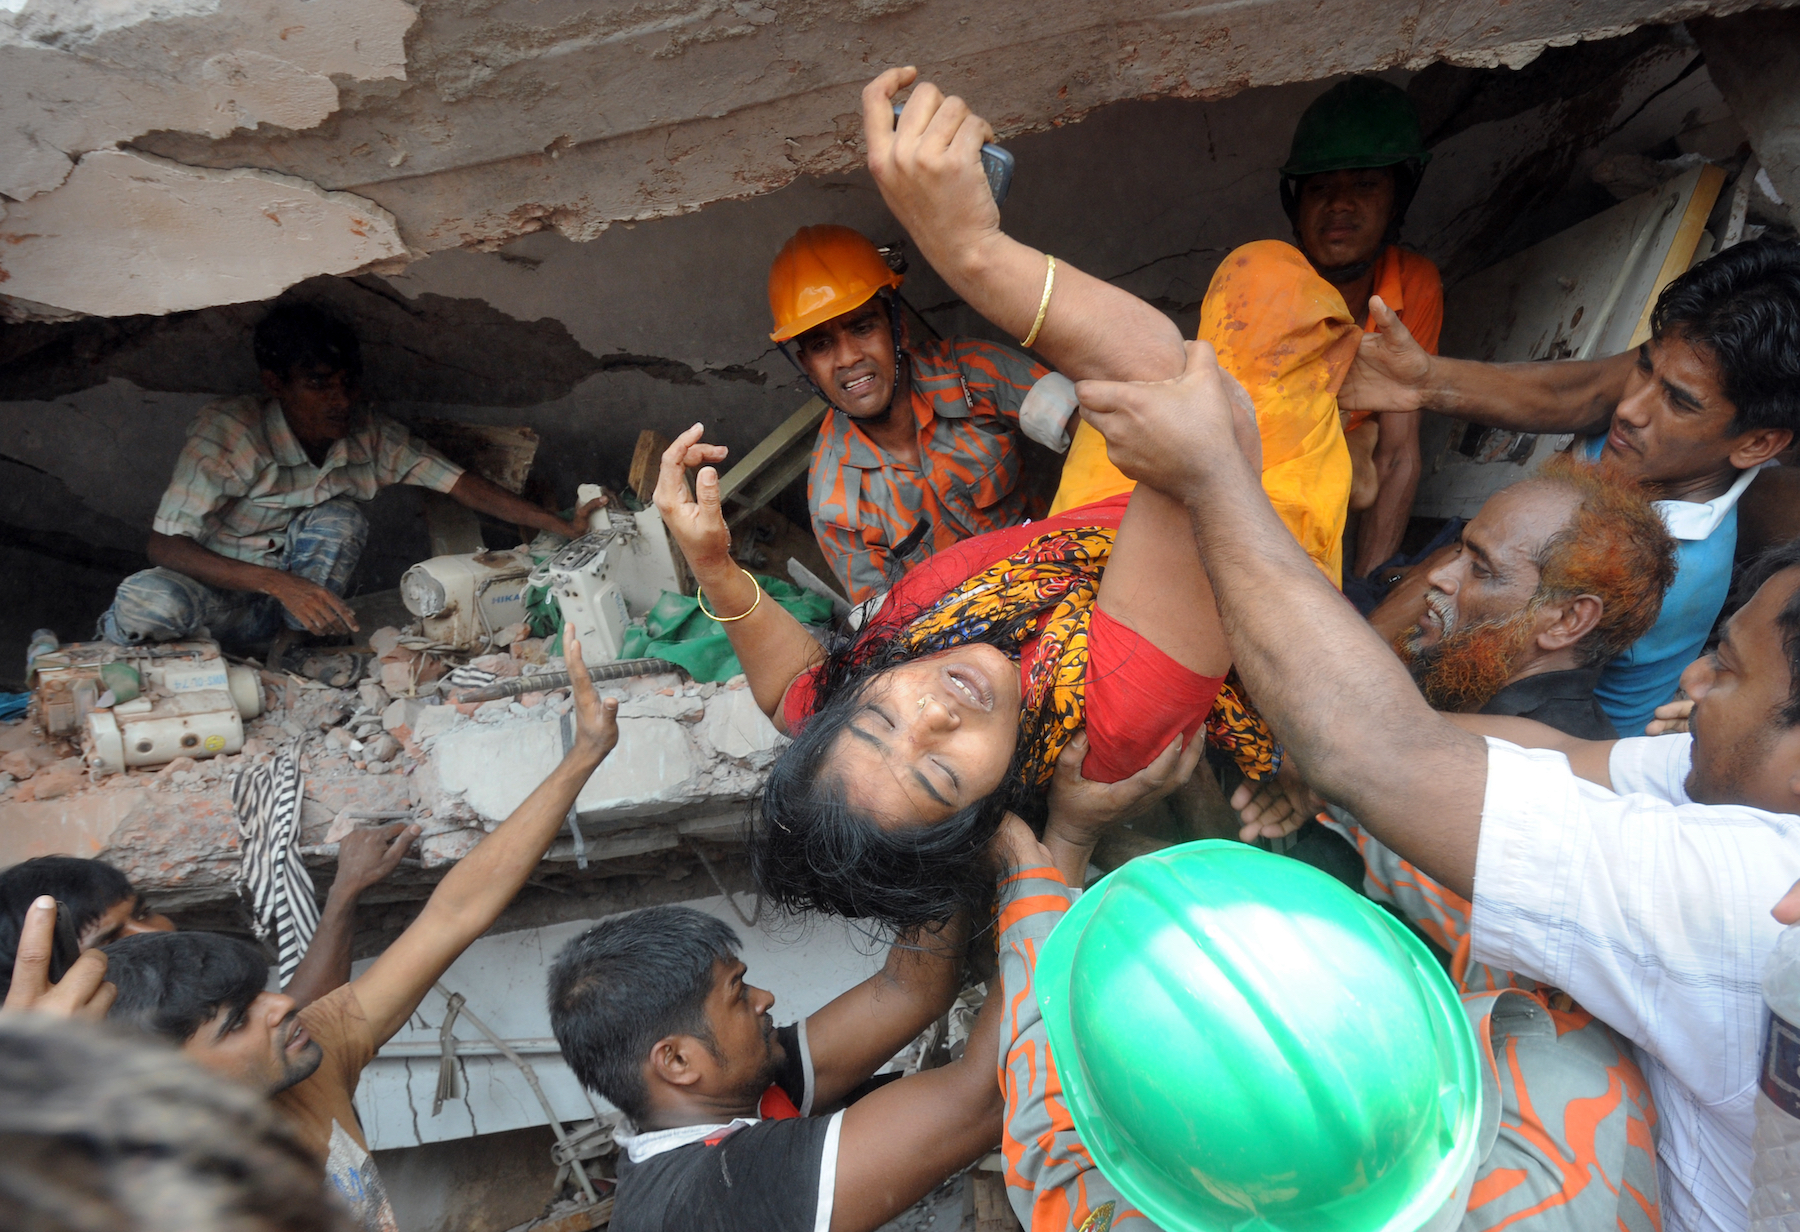 A garment worker is rescued from the Rana Plaza collapse in April 2013